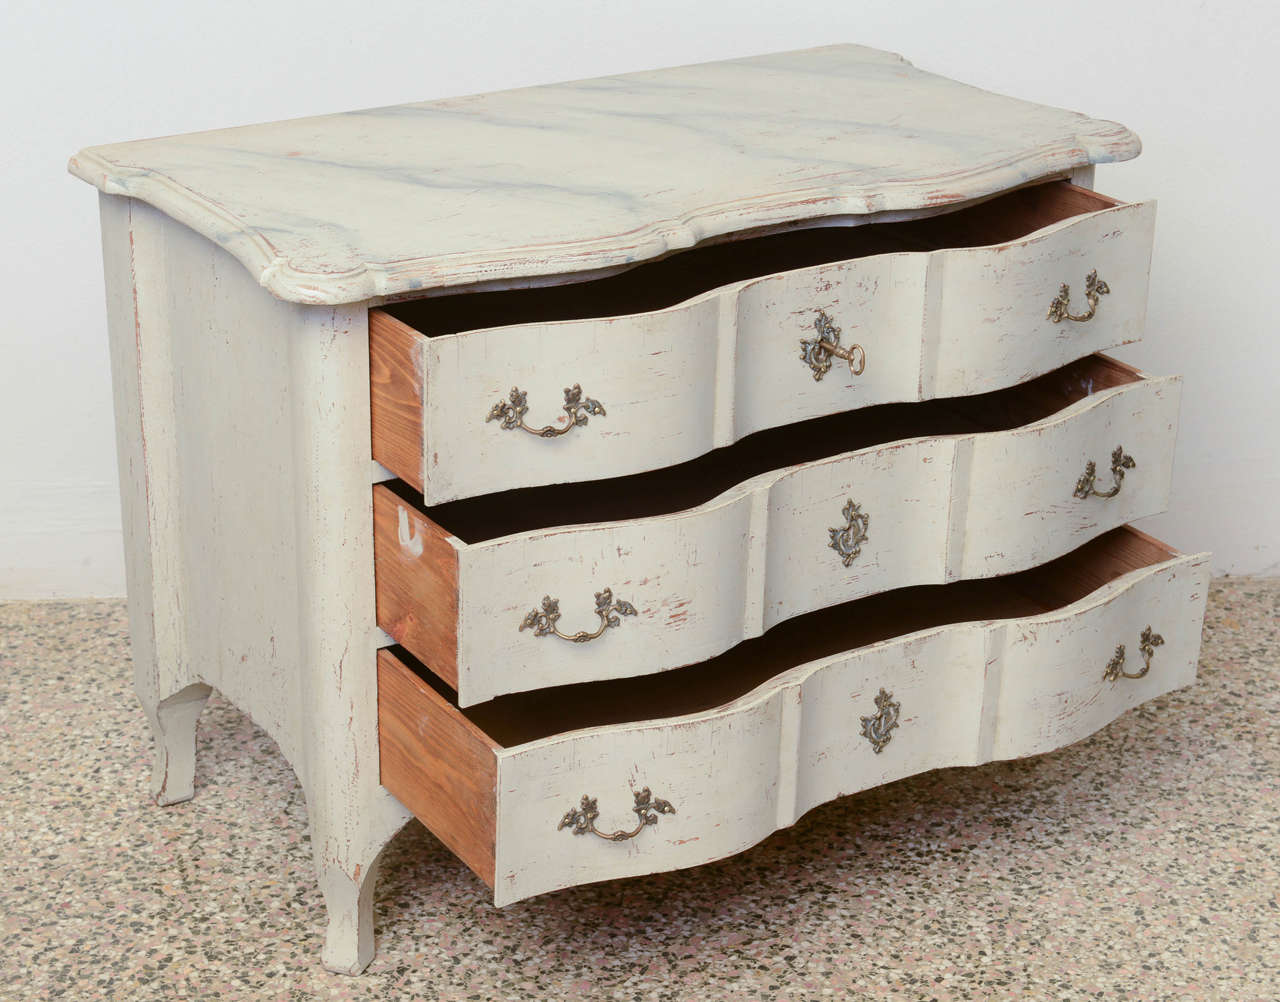 Gorgeous Small Baroque chest with curved rounded top edge that extends over three curved drawers; has four curved legs and original locks.
Painted in Swedish white/ greyish distressed paint finish, top is faux marble paint finish.
Lovely brass